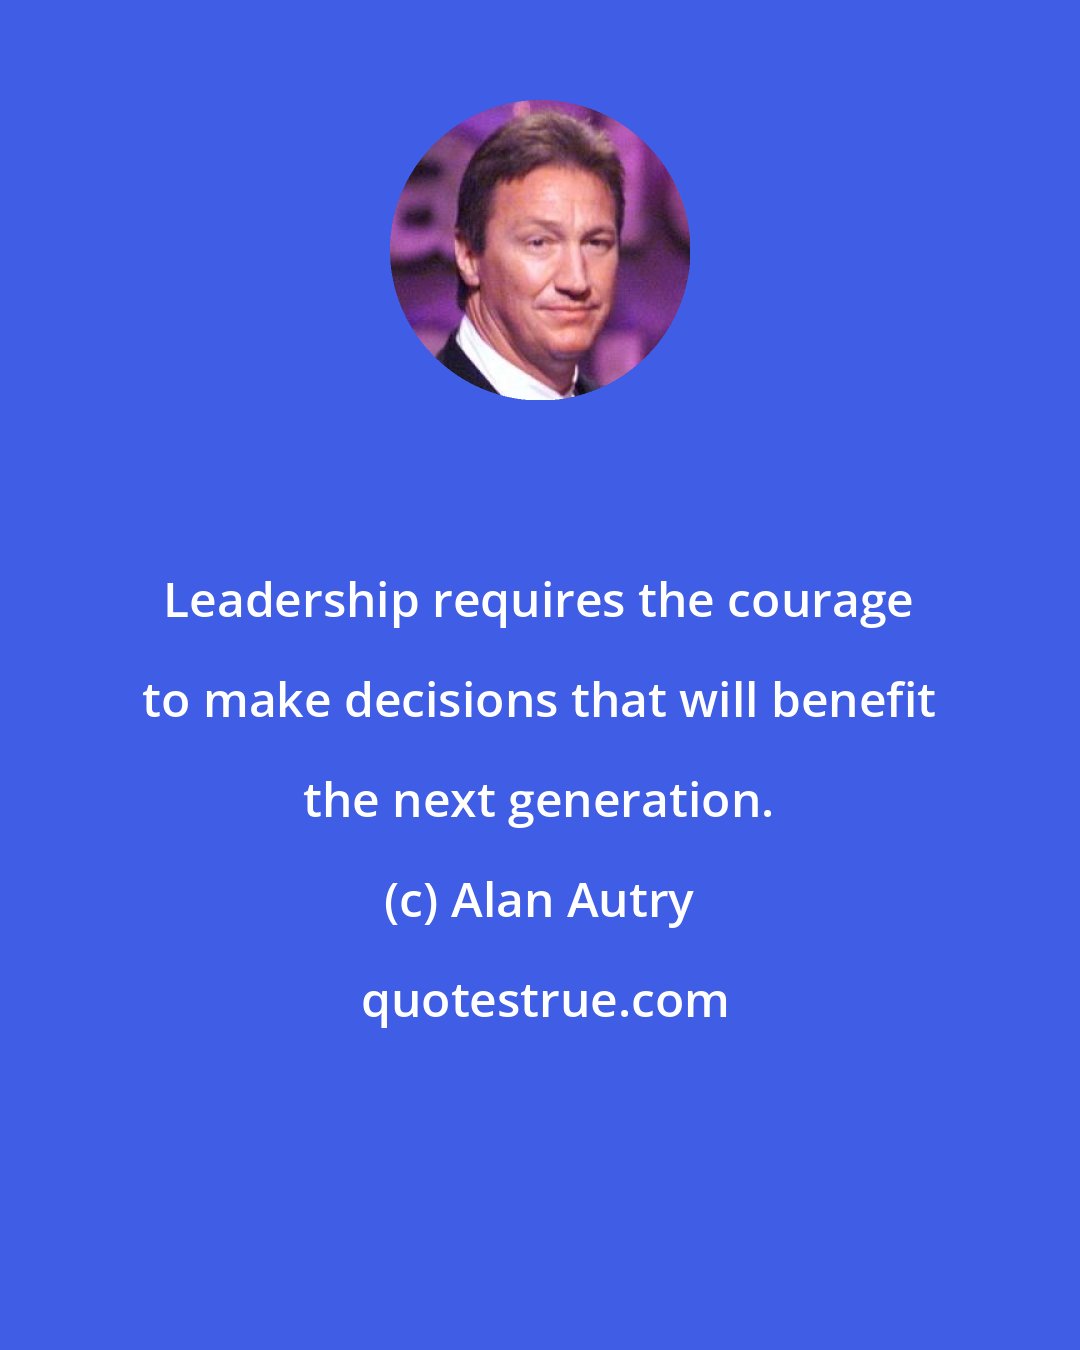 Alan Autry: Leadership requires the courage to make decisions that will benefit the next generation.